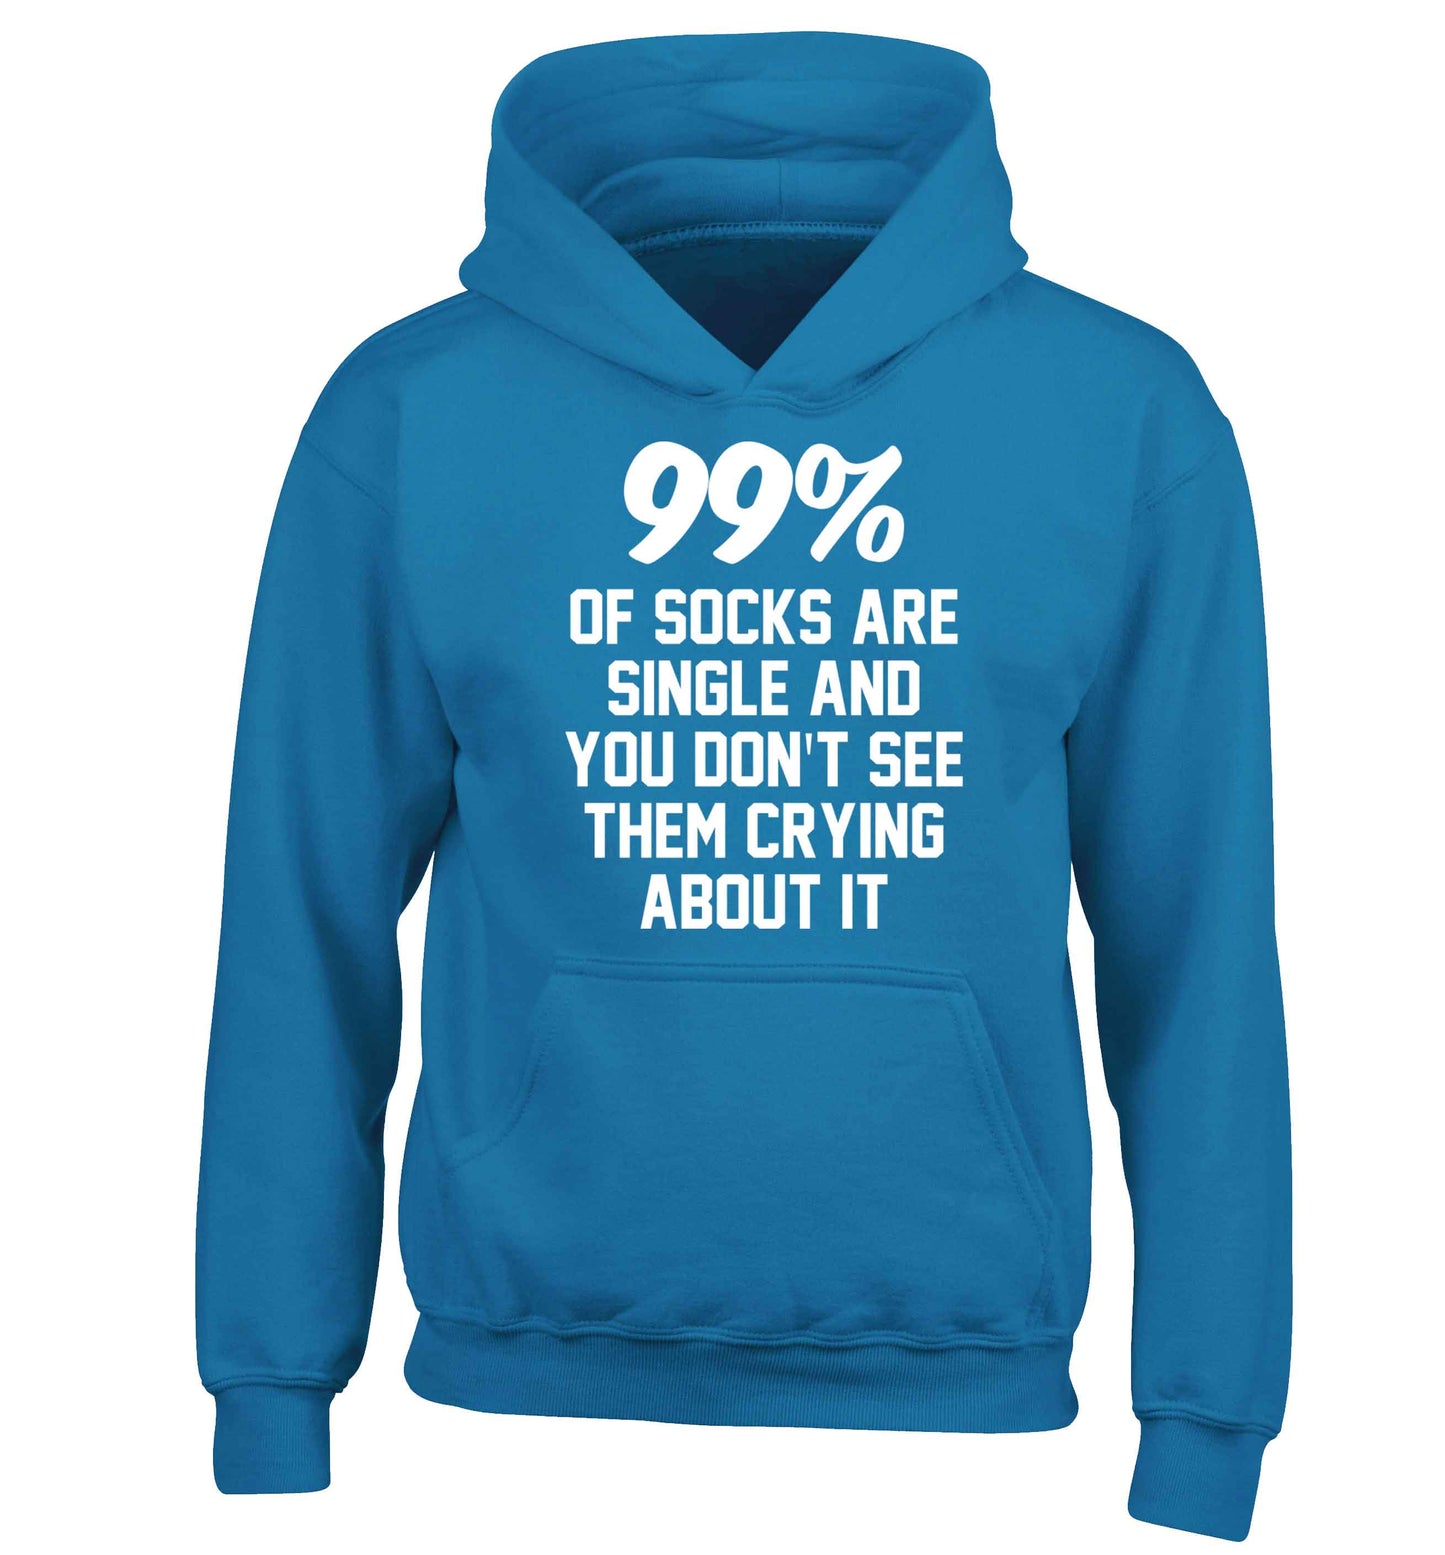 99% of socks are single and you don't see them crying about it children's blue hoodie 12-13 Years